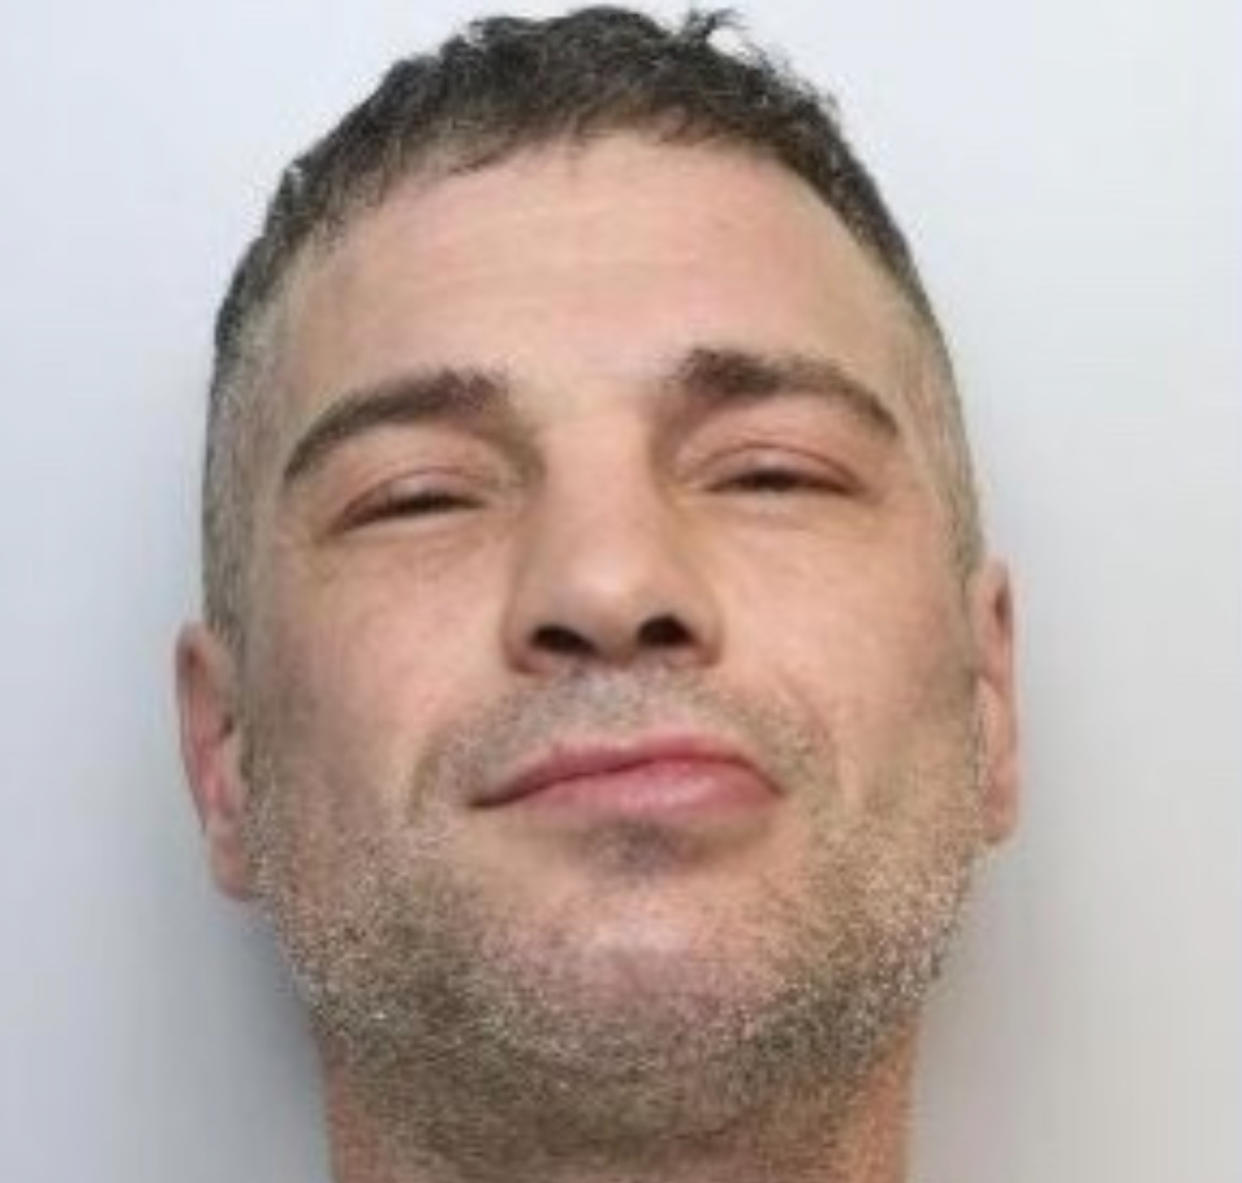 David Fairweather attacked two sisters in an ‘unprovoked frenzy of brutal violence’ at a Christmas gathering. (South Yorkshire Police)